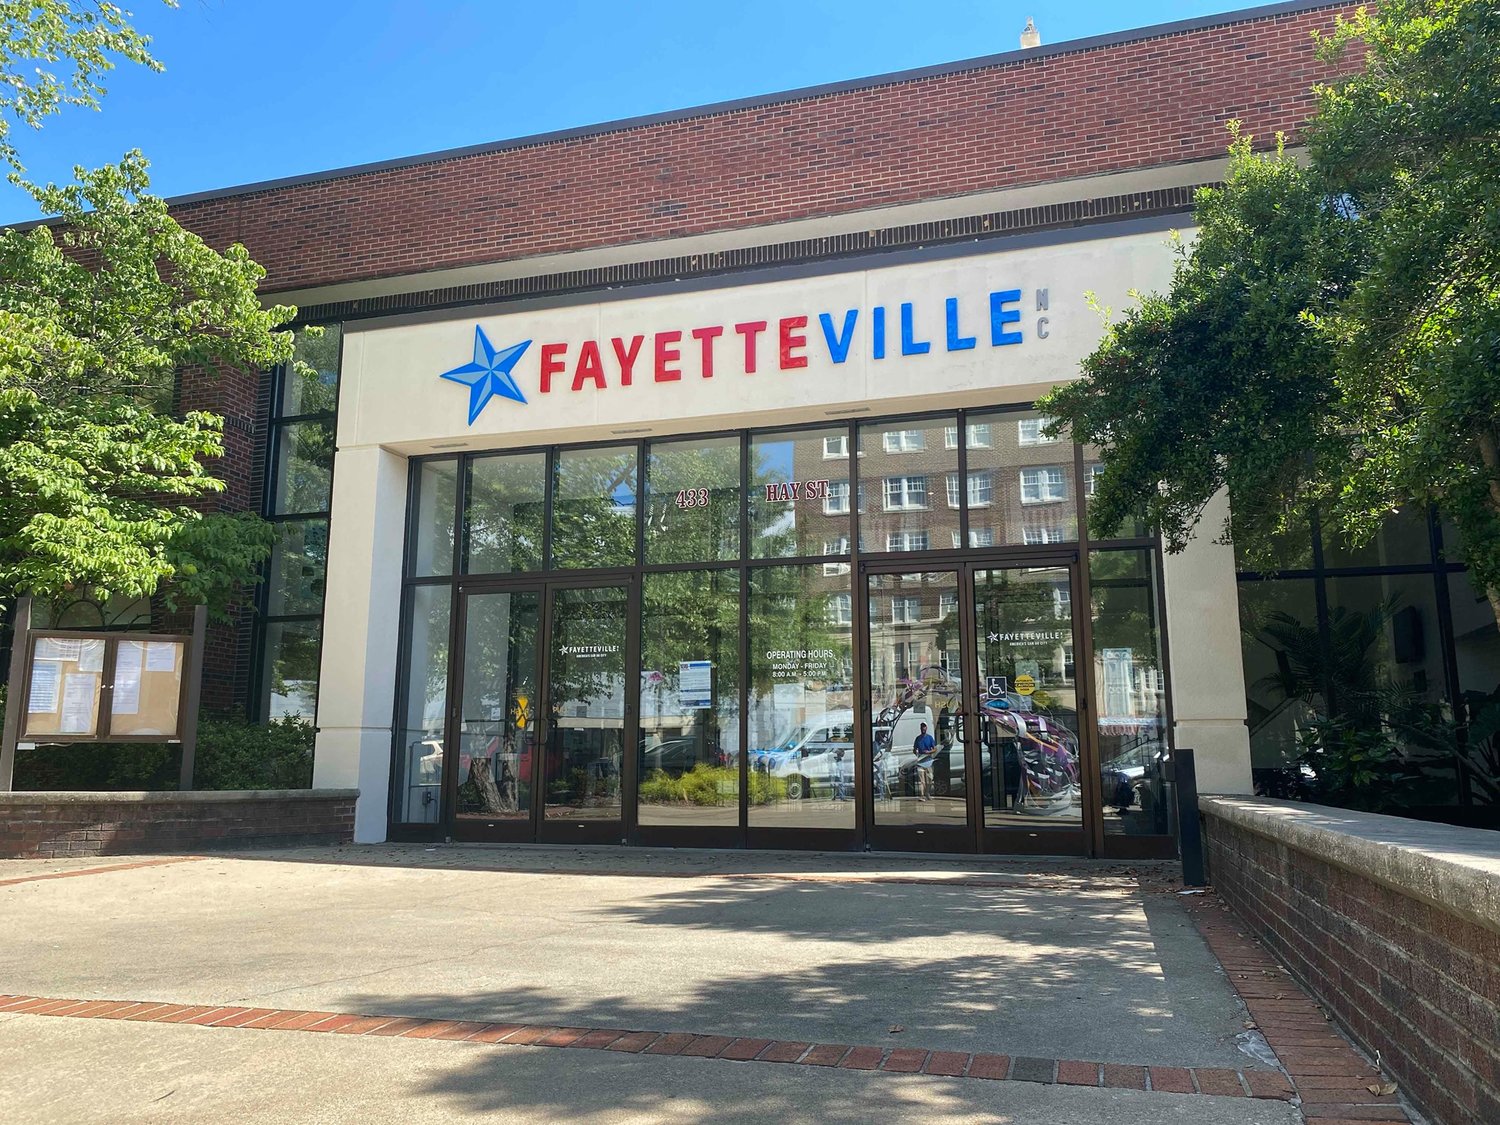 Three council members did not attend an emergency meeting of the Fayetteville City Council on Sept. 2 to discuss litigation related to the initiative that could change the way council members are elected.